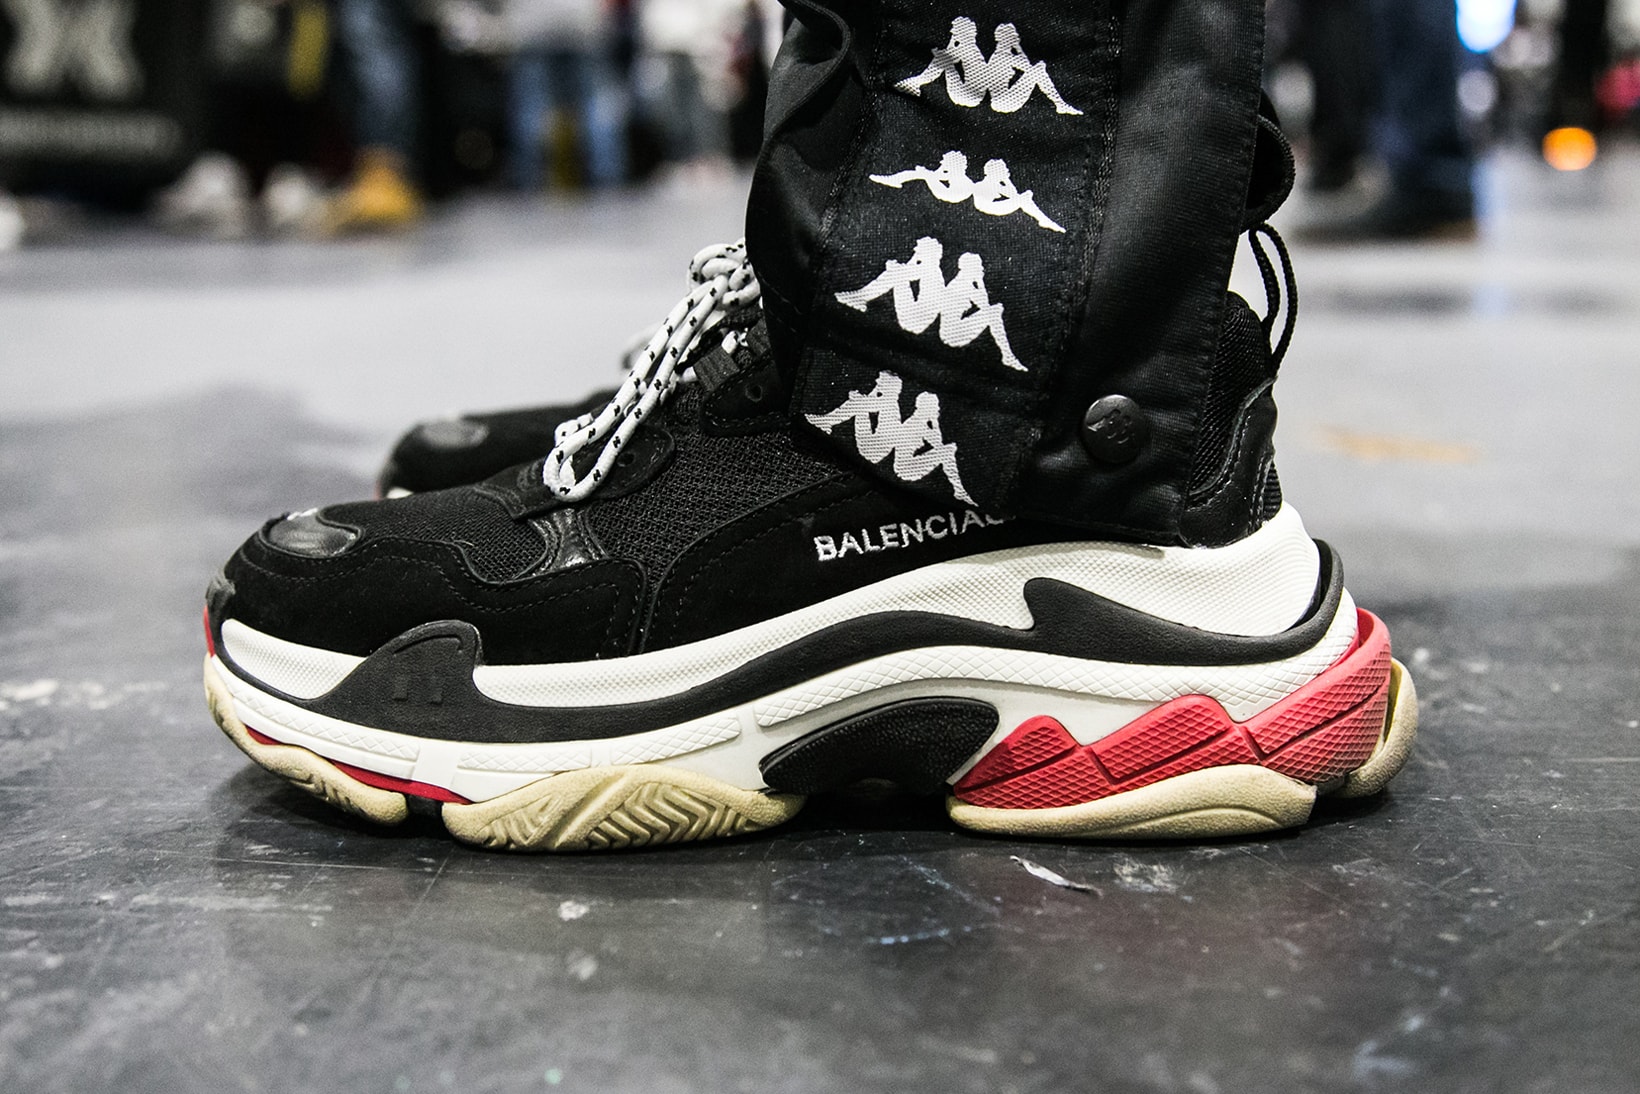 Balenciaga Fastest Growing Brand in Kering Group